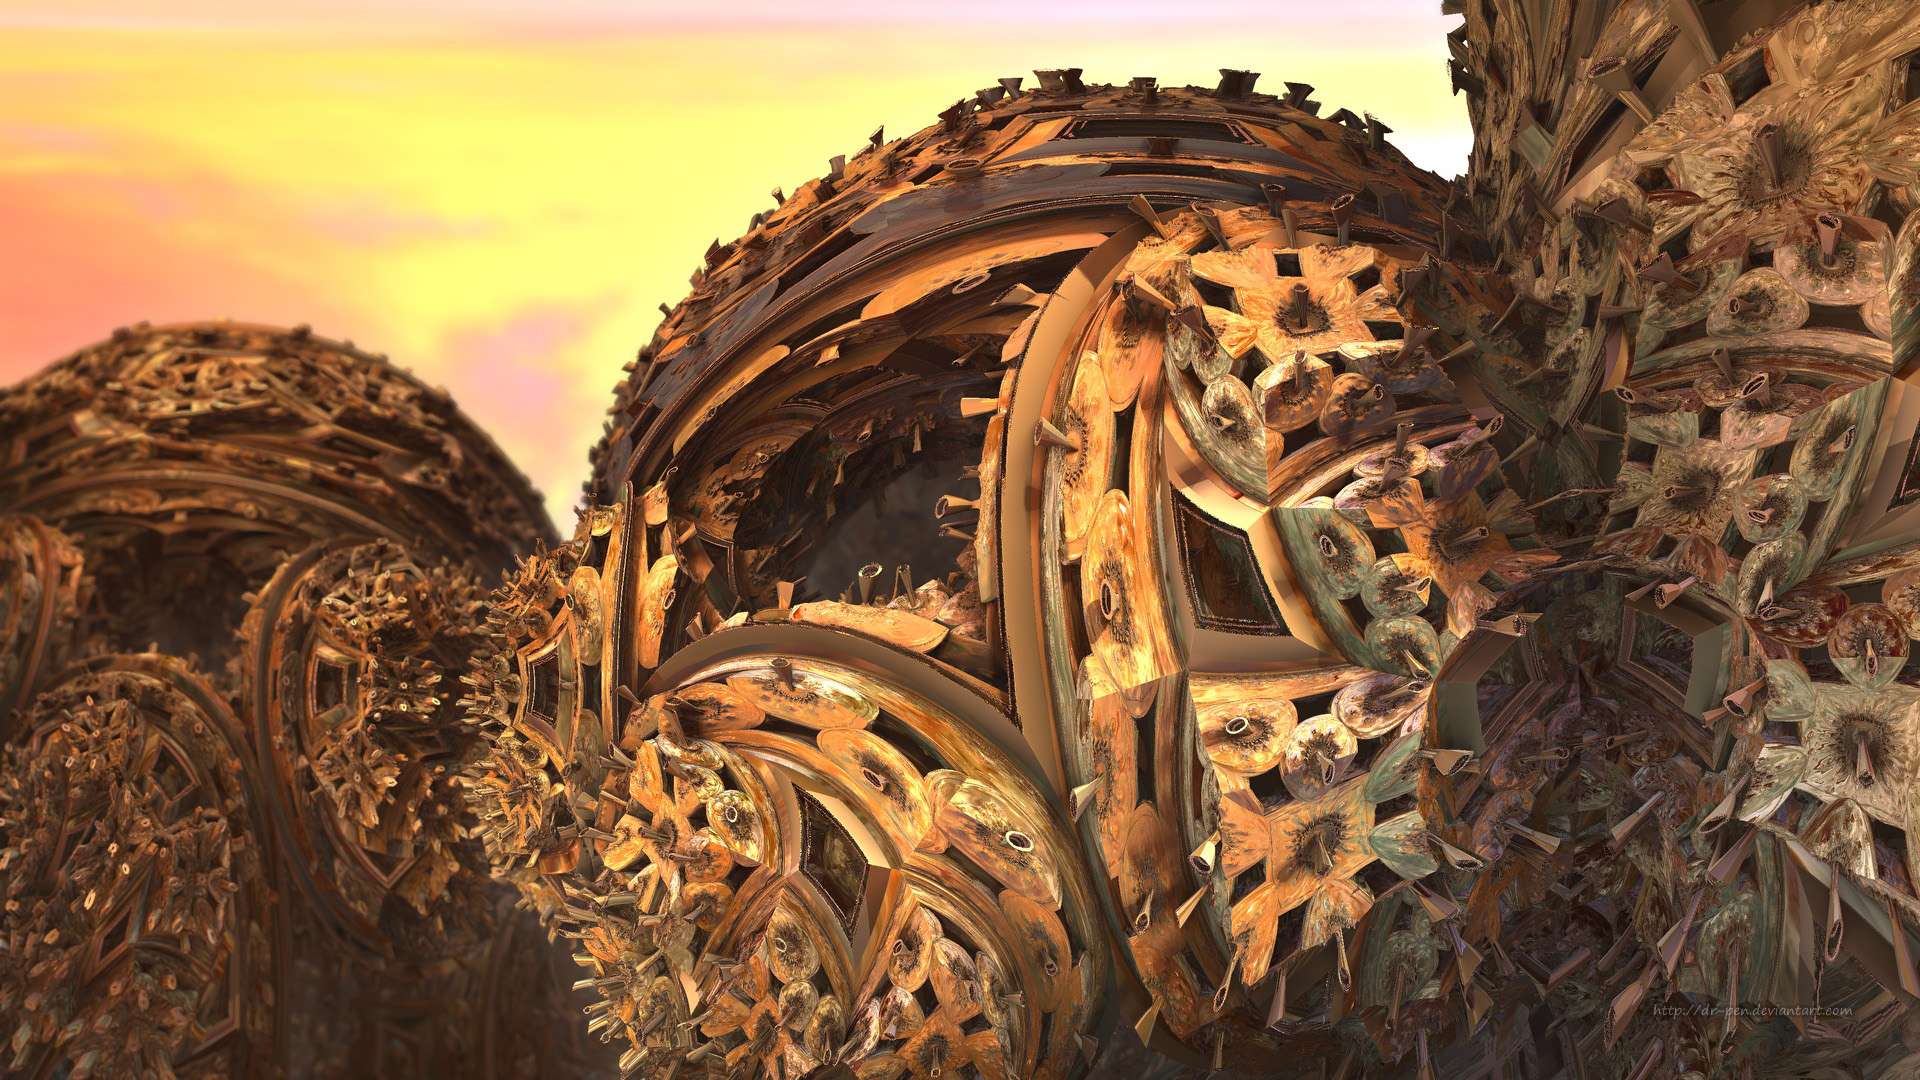 Mountain Peaks of Bulbs at Sunset - 3d Fractal Art by Dr-Pen